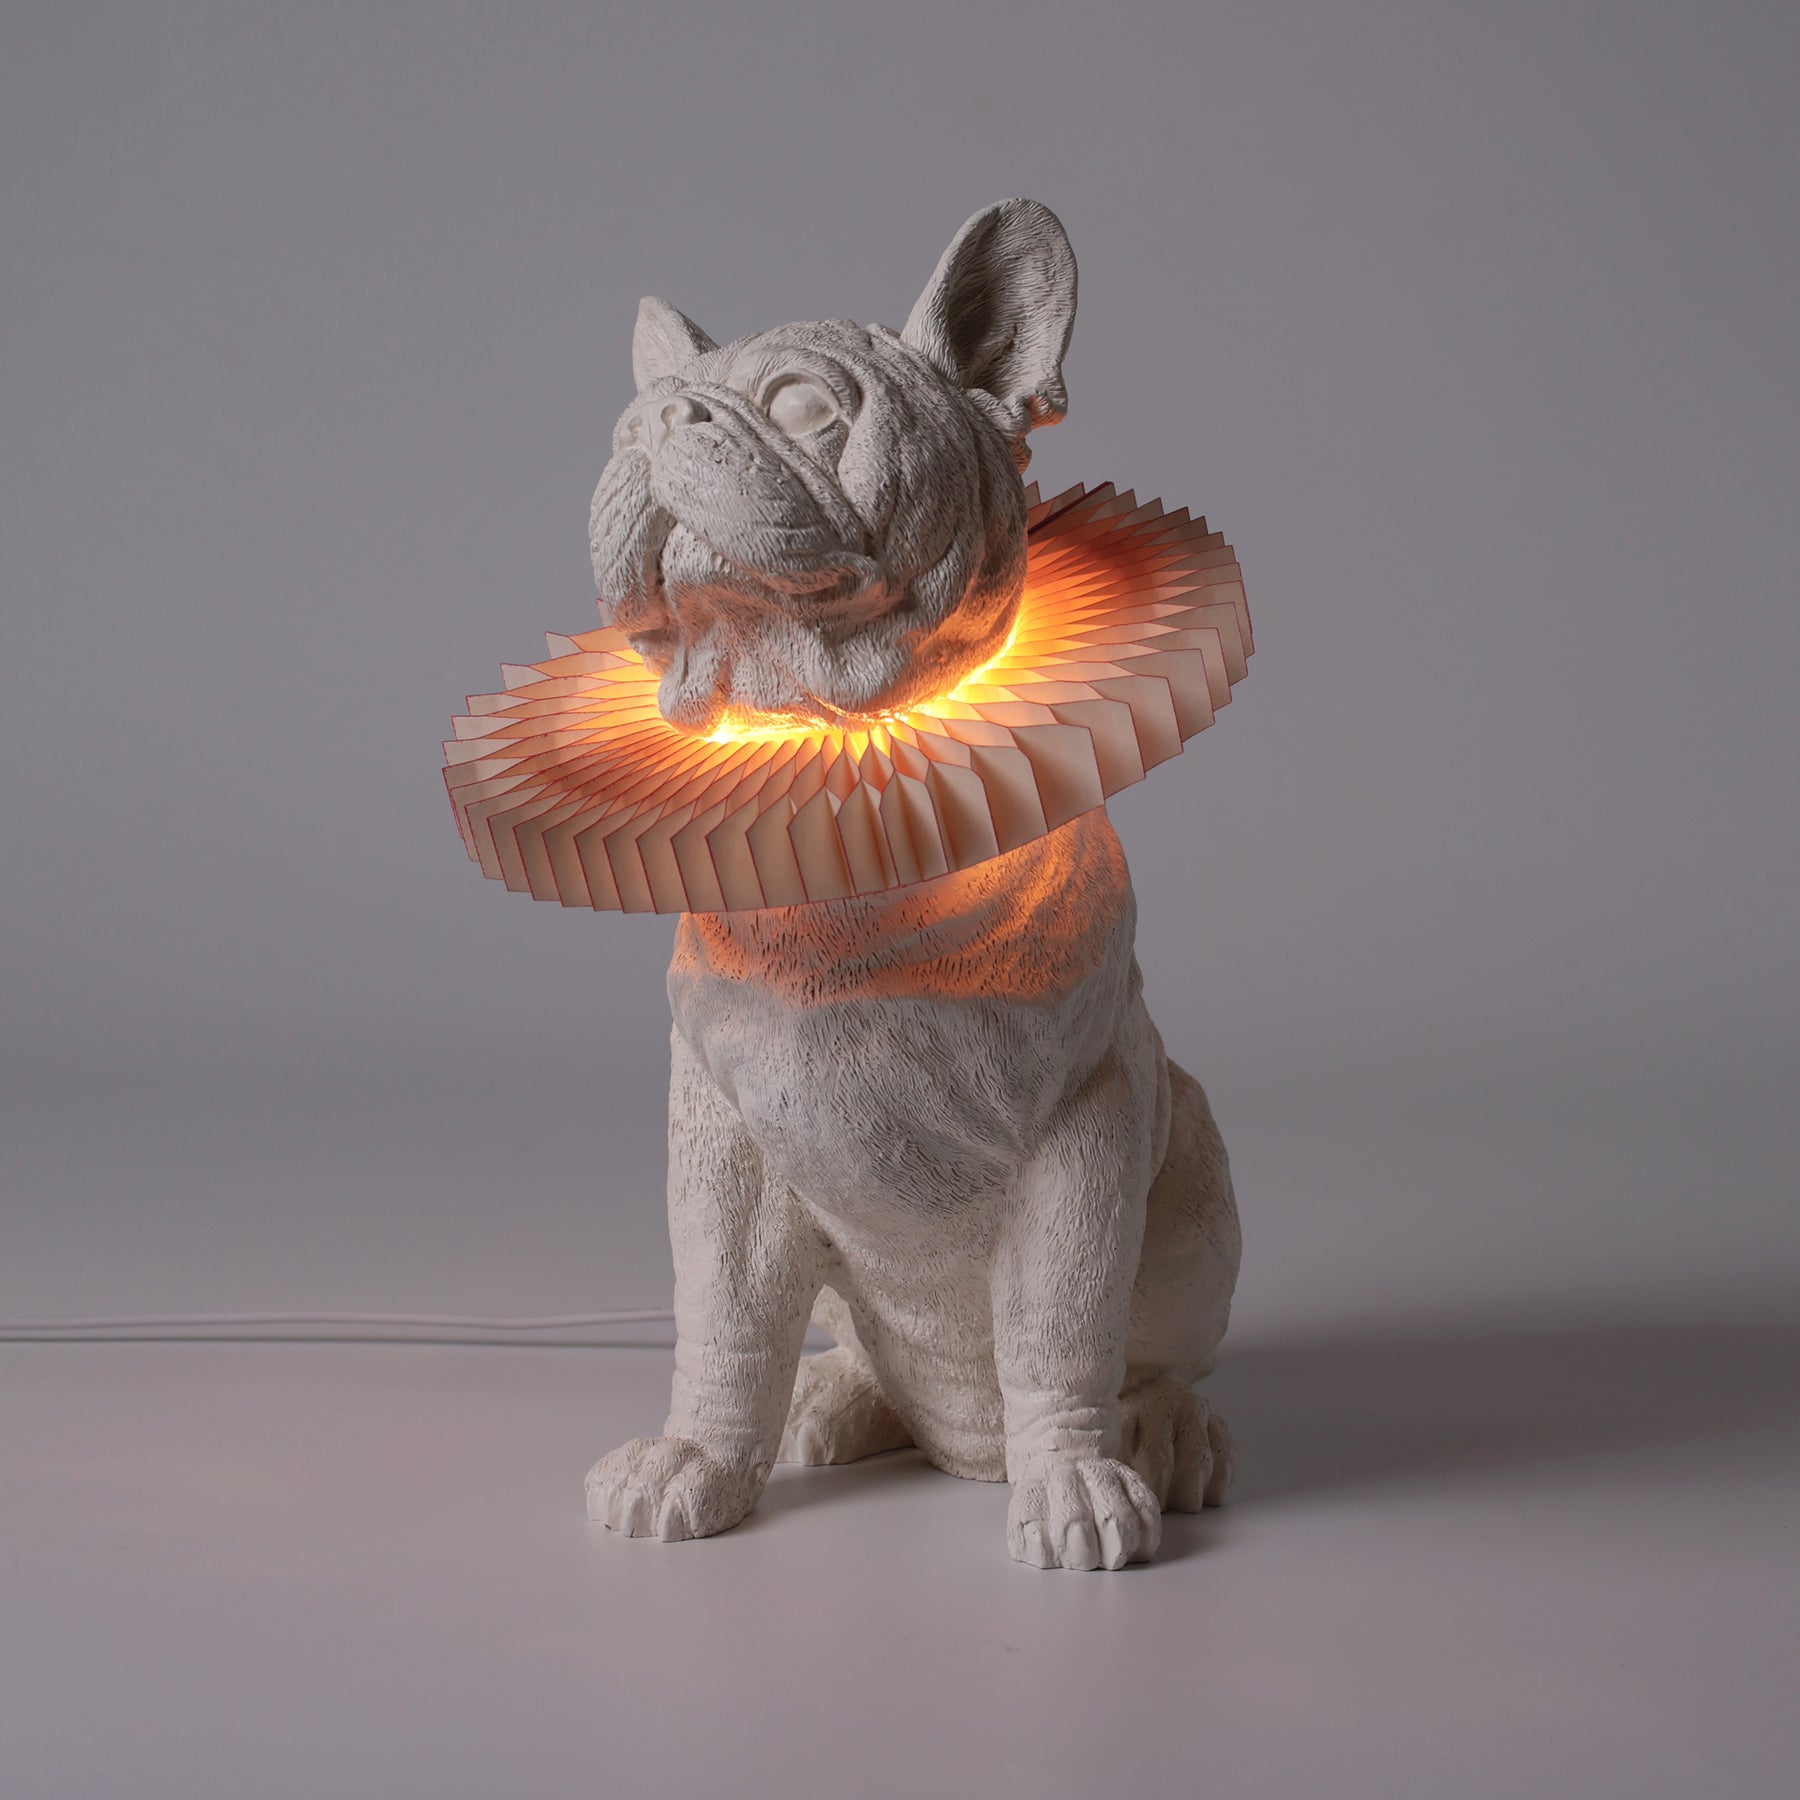 French bulldog table lamp brings nature into your living spaces